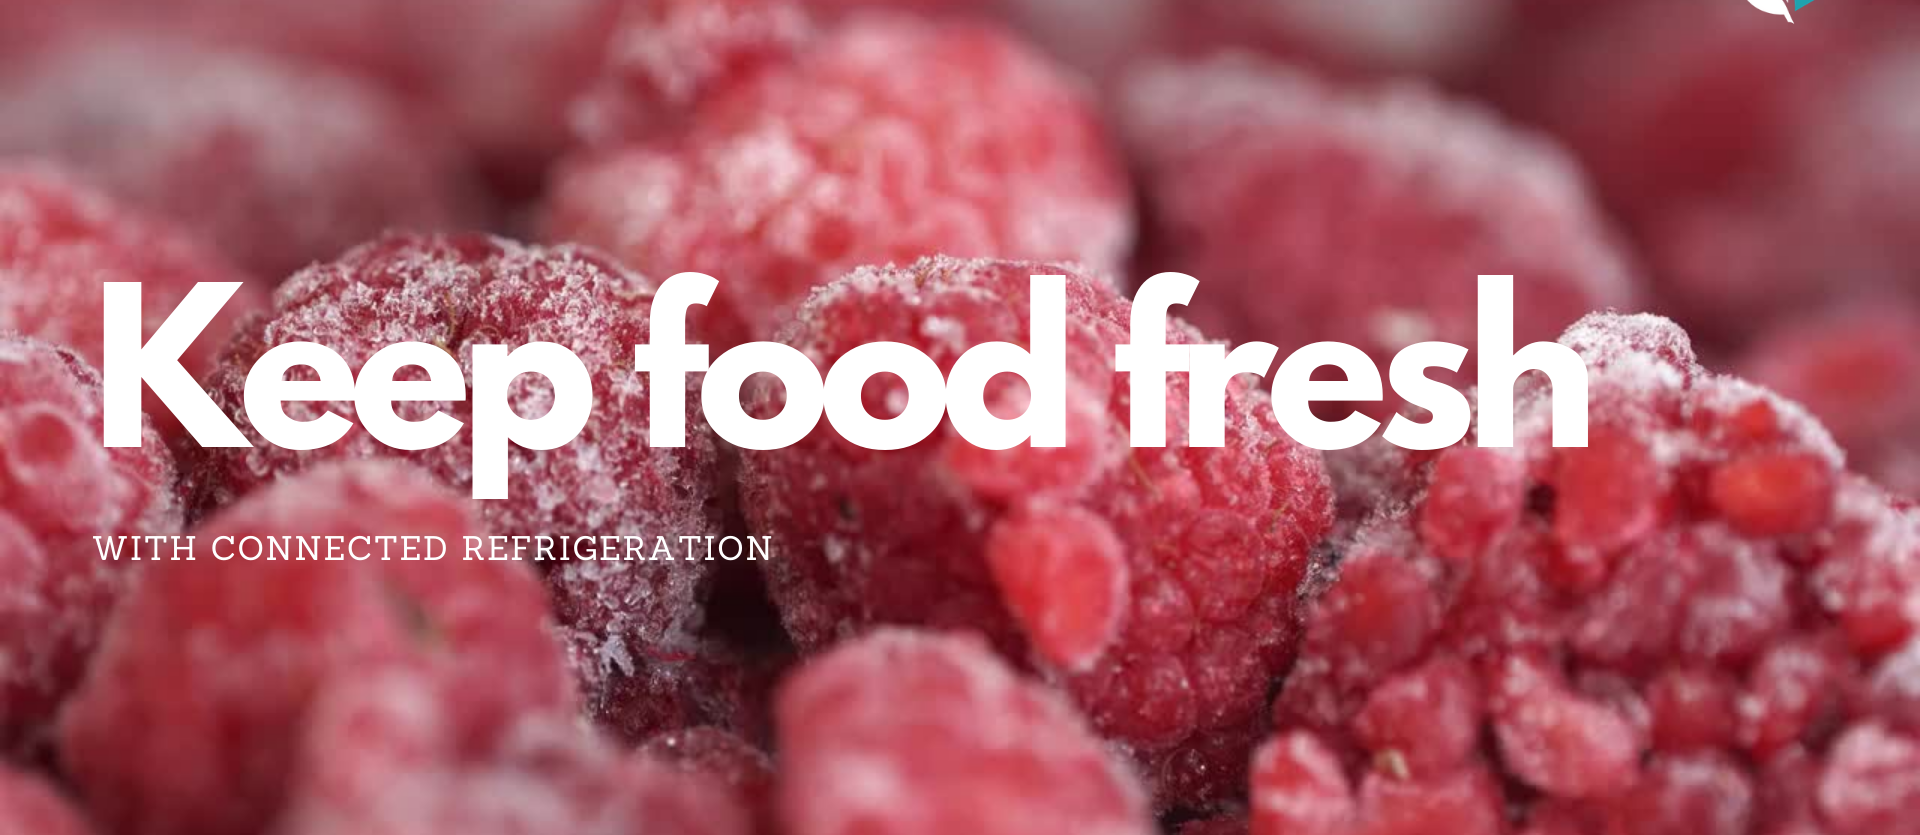 Keep food fresh connected refrigation